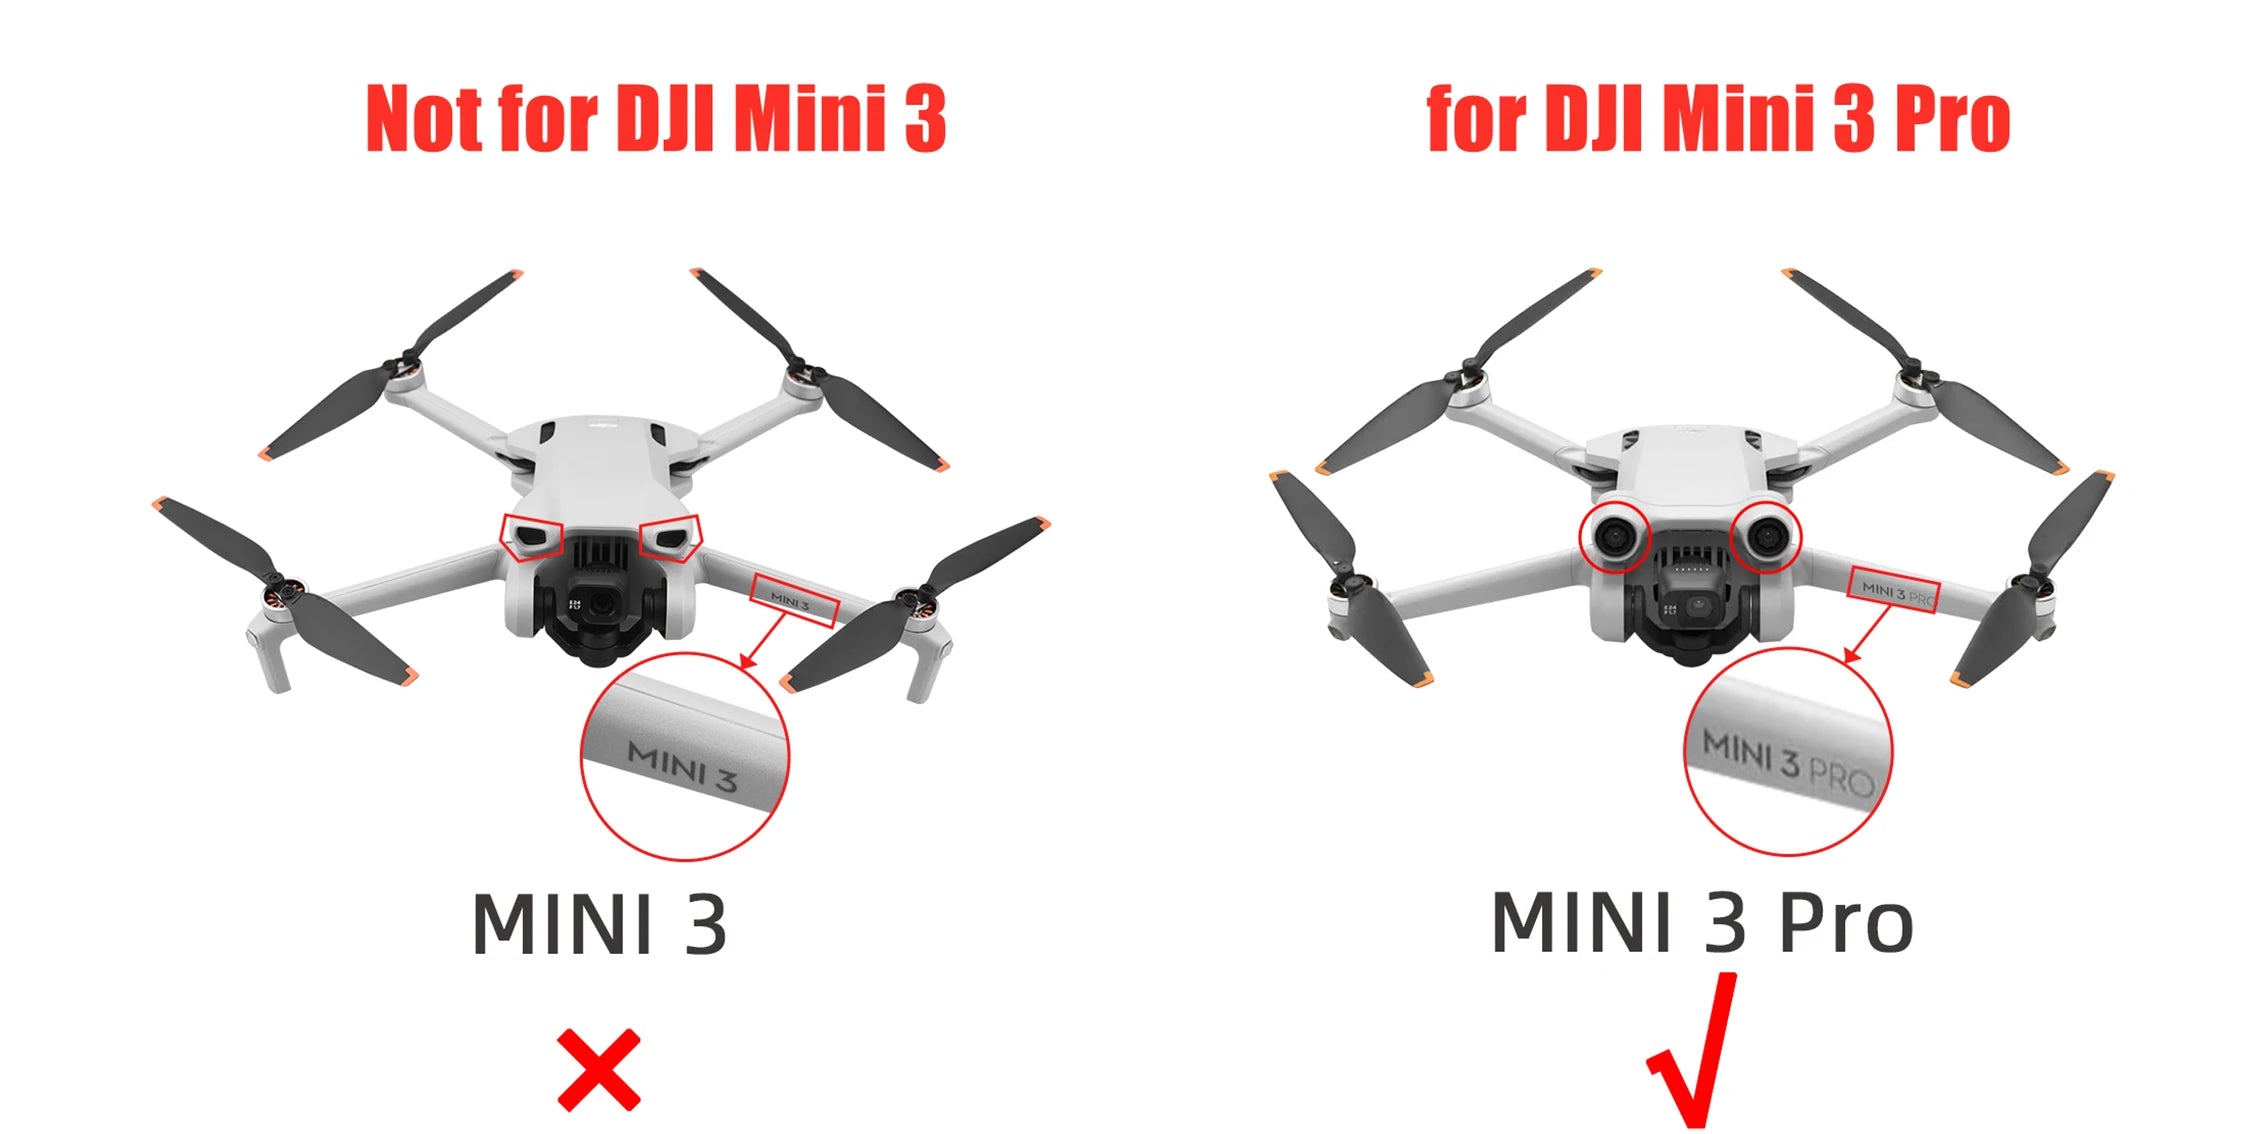 Propeller Stabilizer Holder for DJI Mini 3 PRO, the picture may not reflect the actual color of the item . please make sure you don'